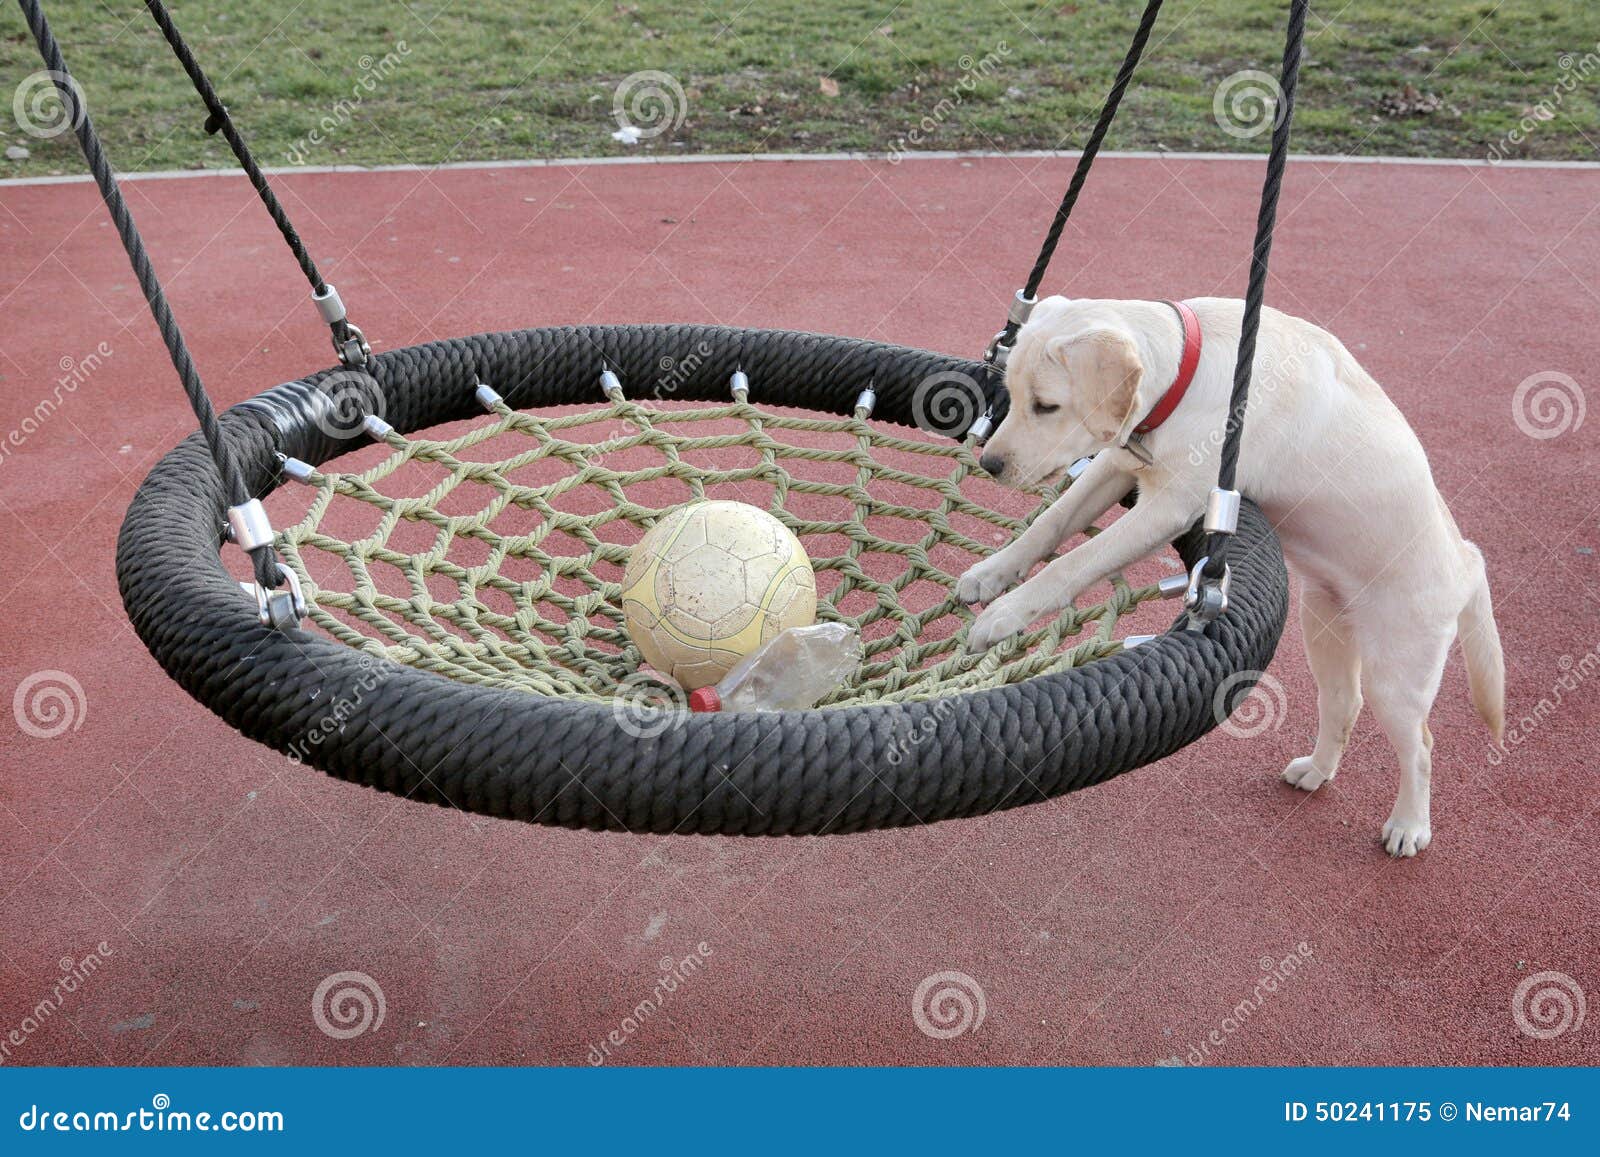 Labrador Puppy Sara Trying To Catch the Ball in Swing Stock Image